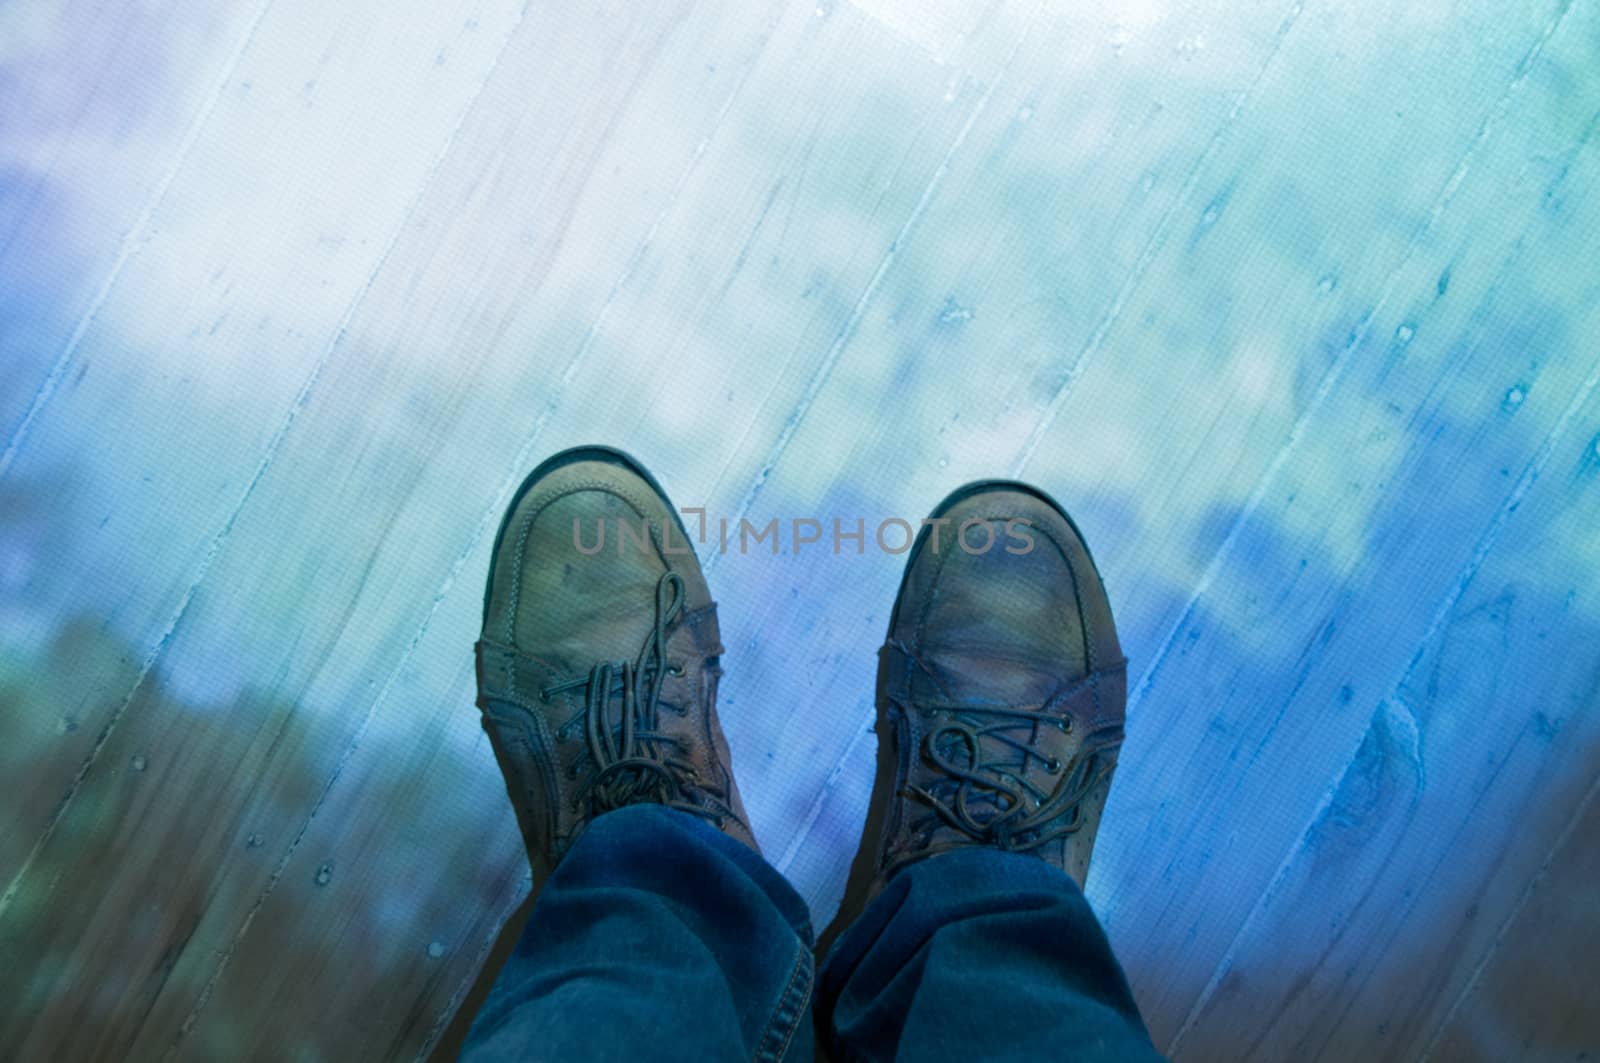 Brown leather shoes and blue jeans standing on a floor by eyeofpaul